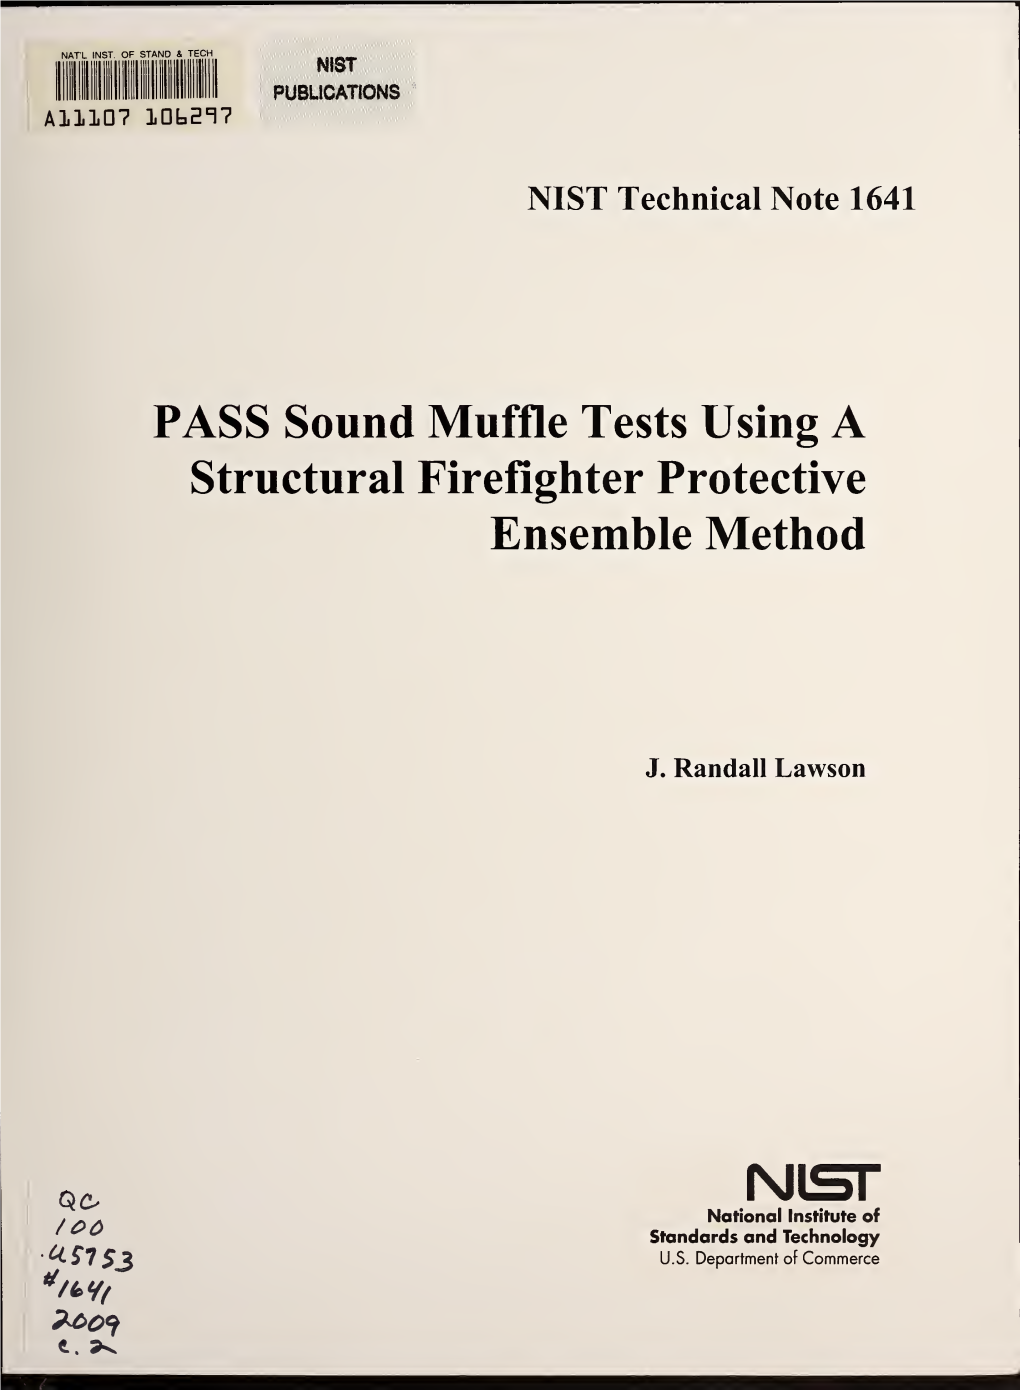 PASS Sound Muffle Tests Using a Structural Firefighter Protective Ensemble Method